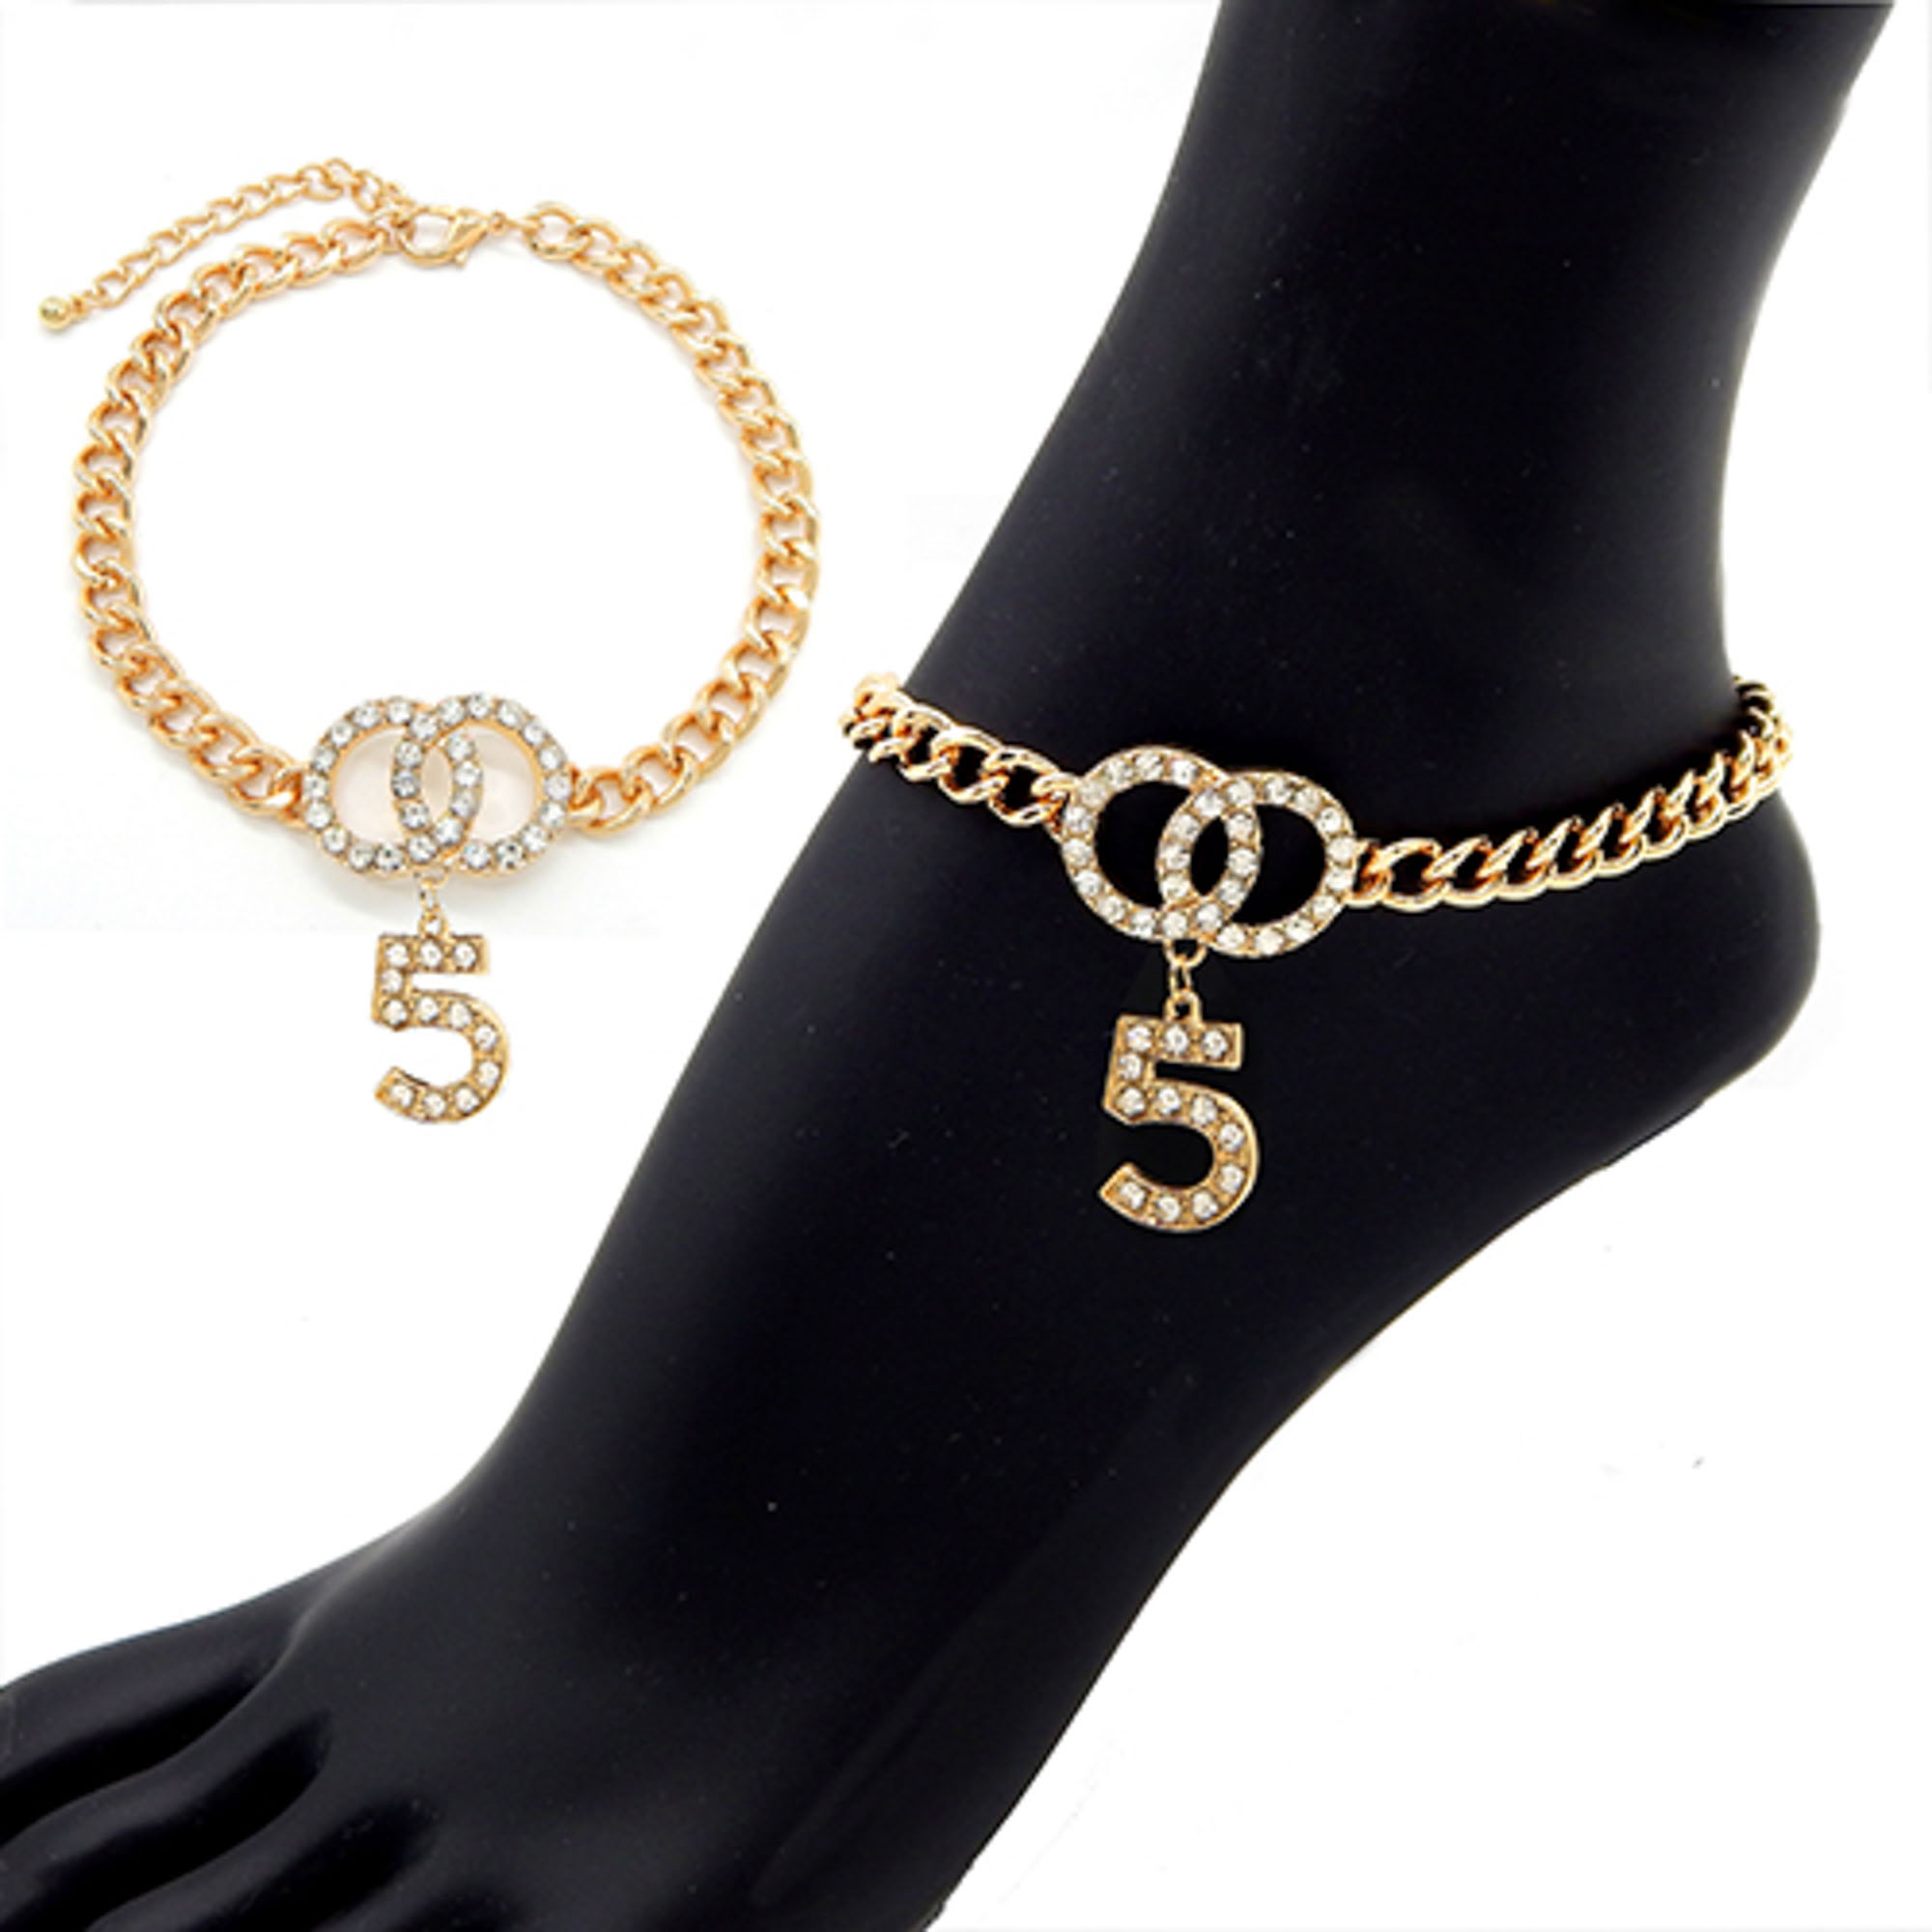 RHINESTONE ANKLET DOUBLE LINK AND 5